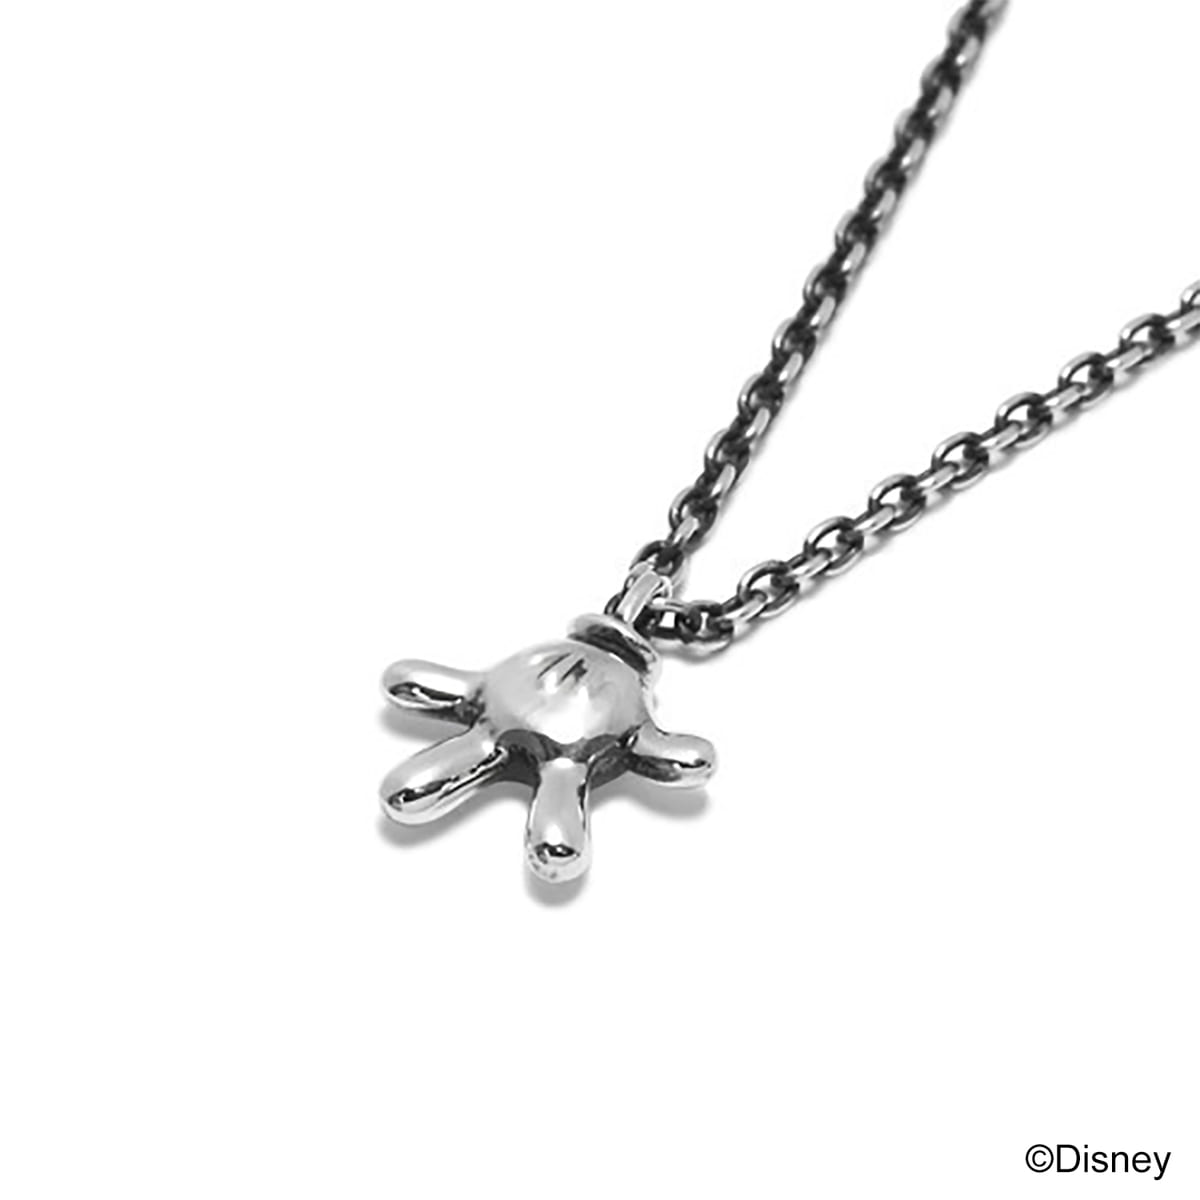 01“MICKEY”HAND NECKLACE